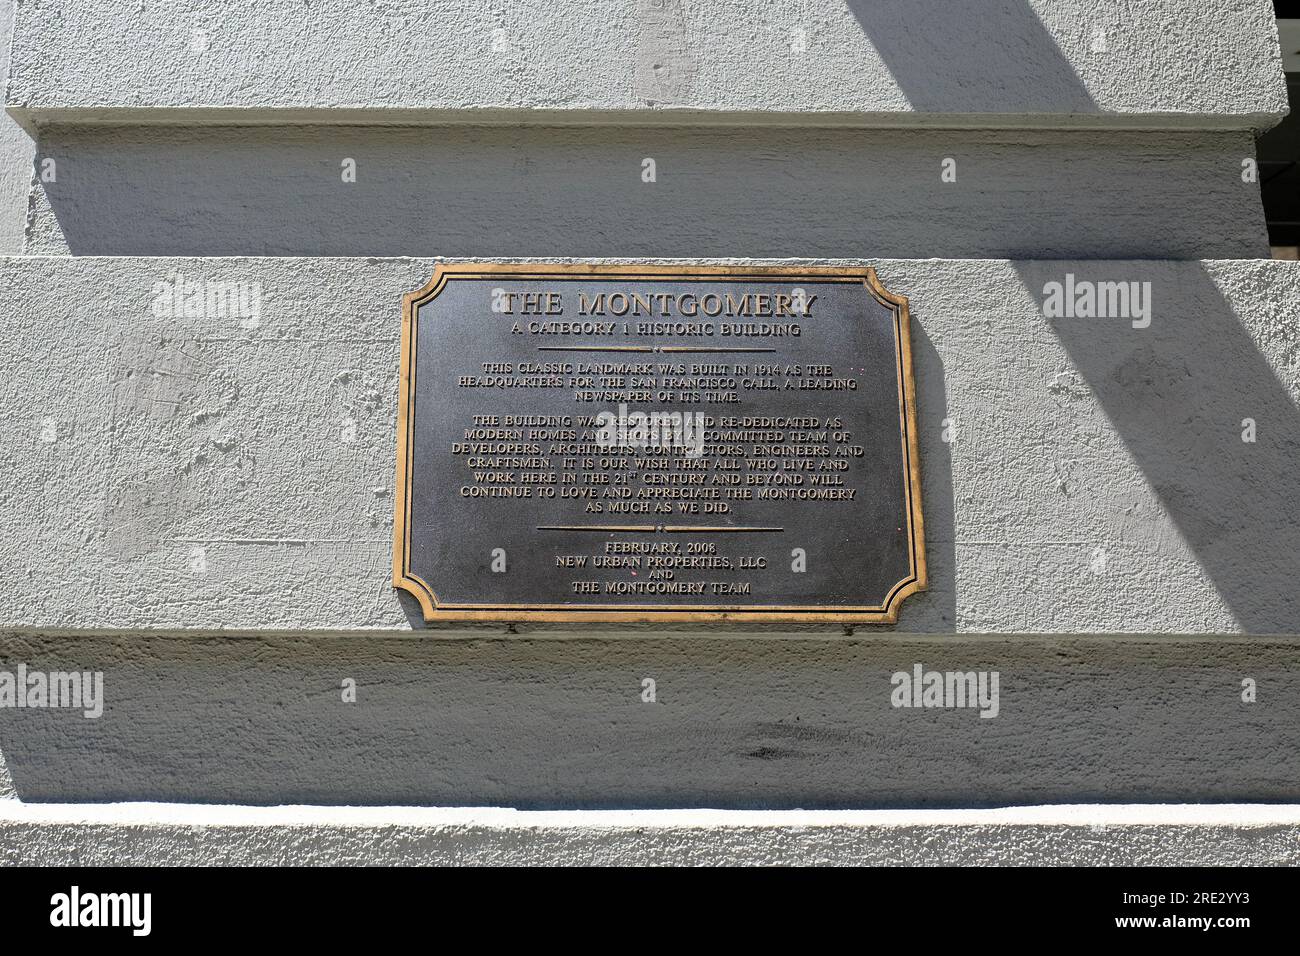 Plaque commemorating The Montgomery building in downtown San Francisco, California, as a Category 1 Historic Building converted into condominiums. Stock Photo